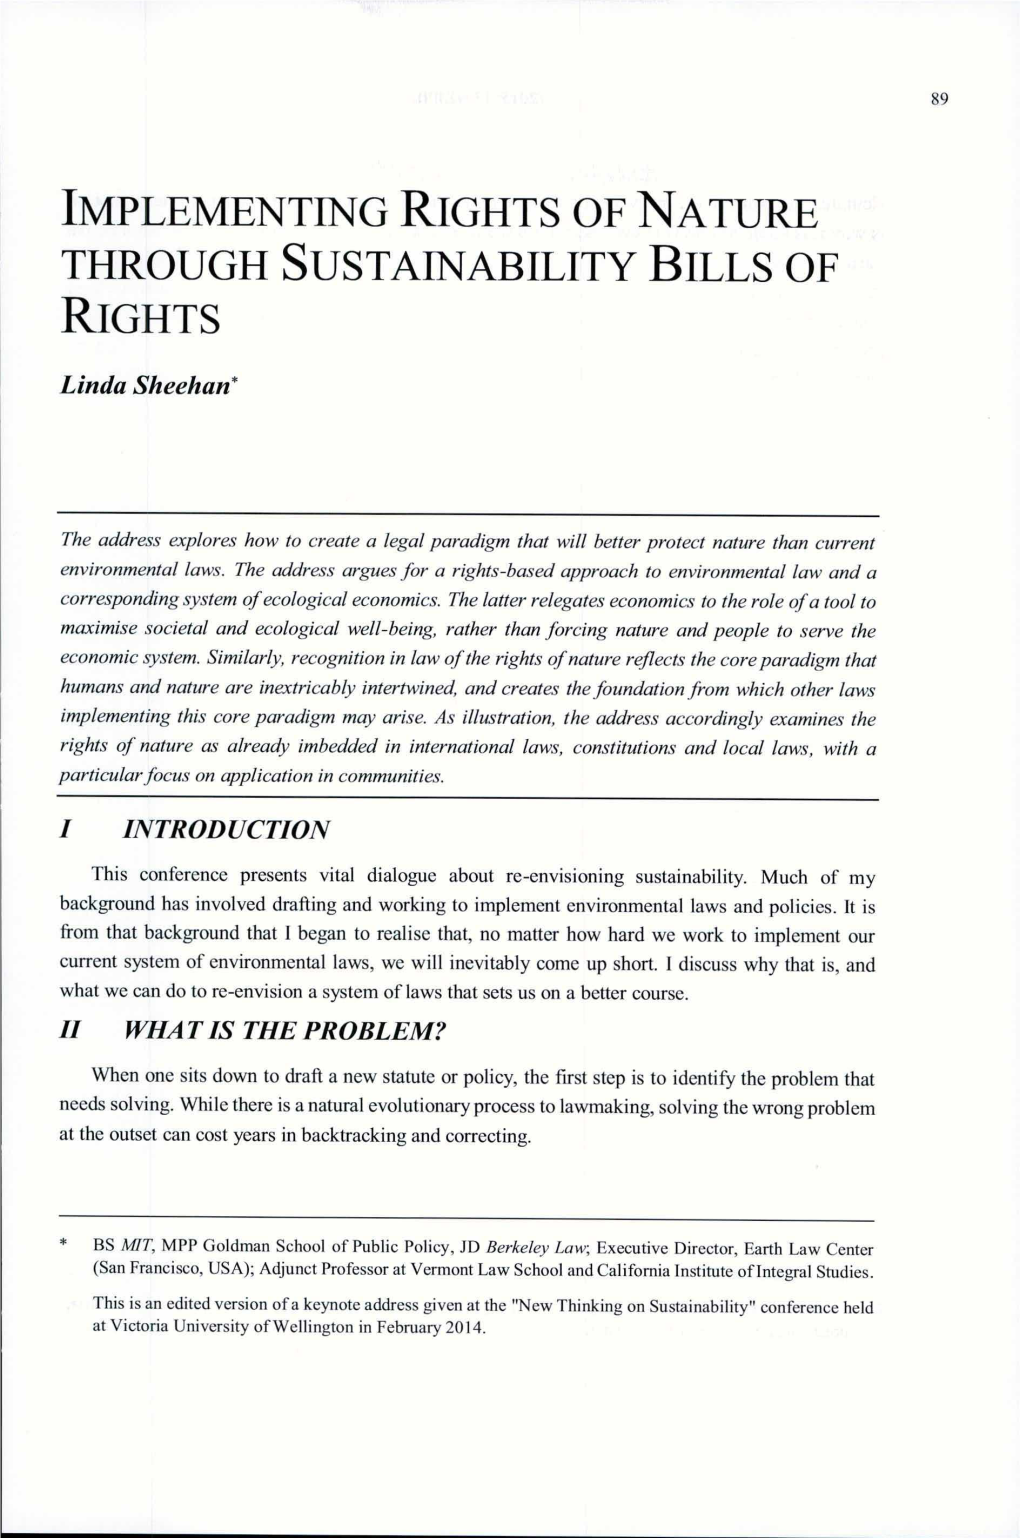 Implementing Rights of Nature Through Sustainability Bills of Rights